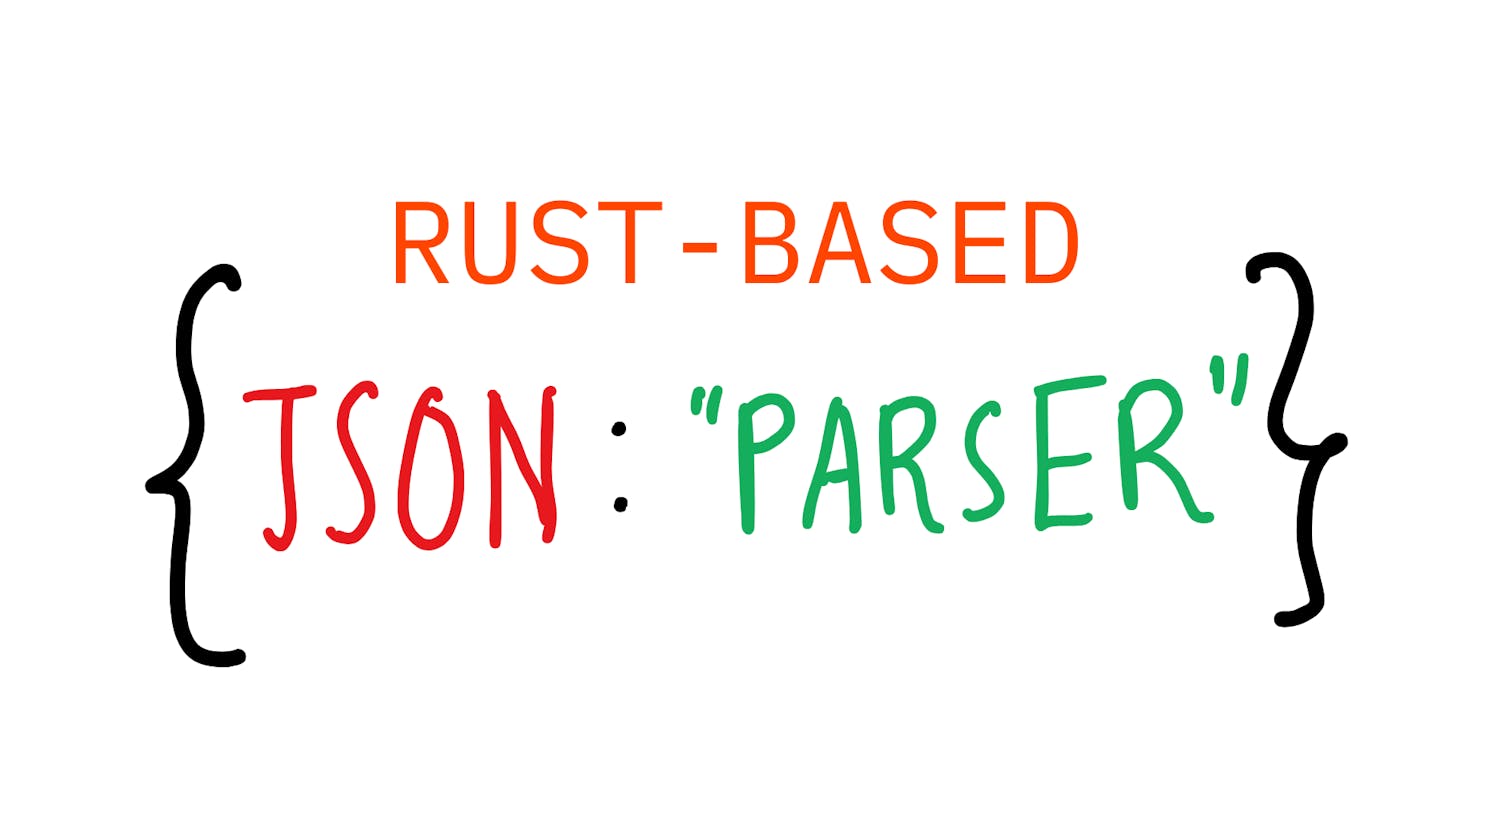 Building a basic JSON parser in Rust